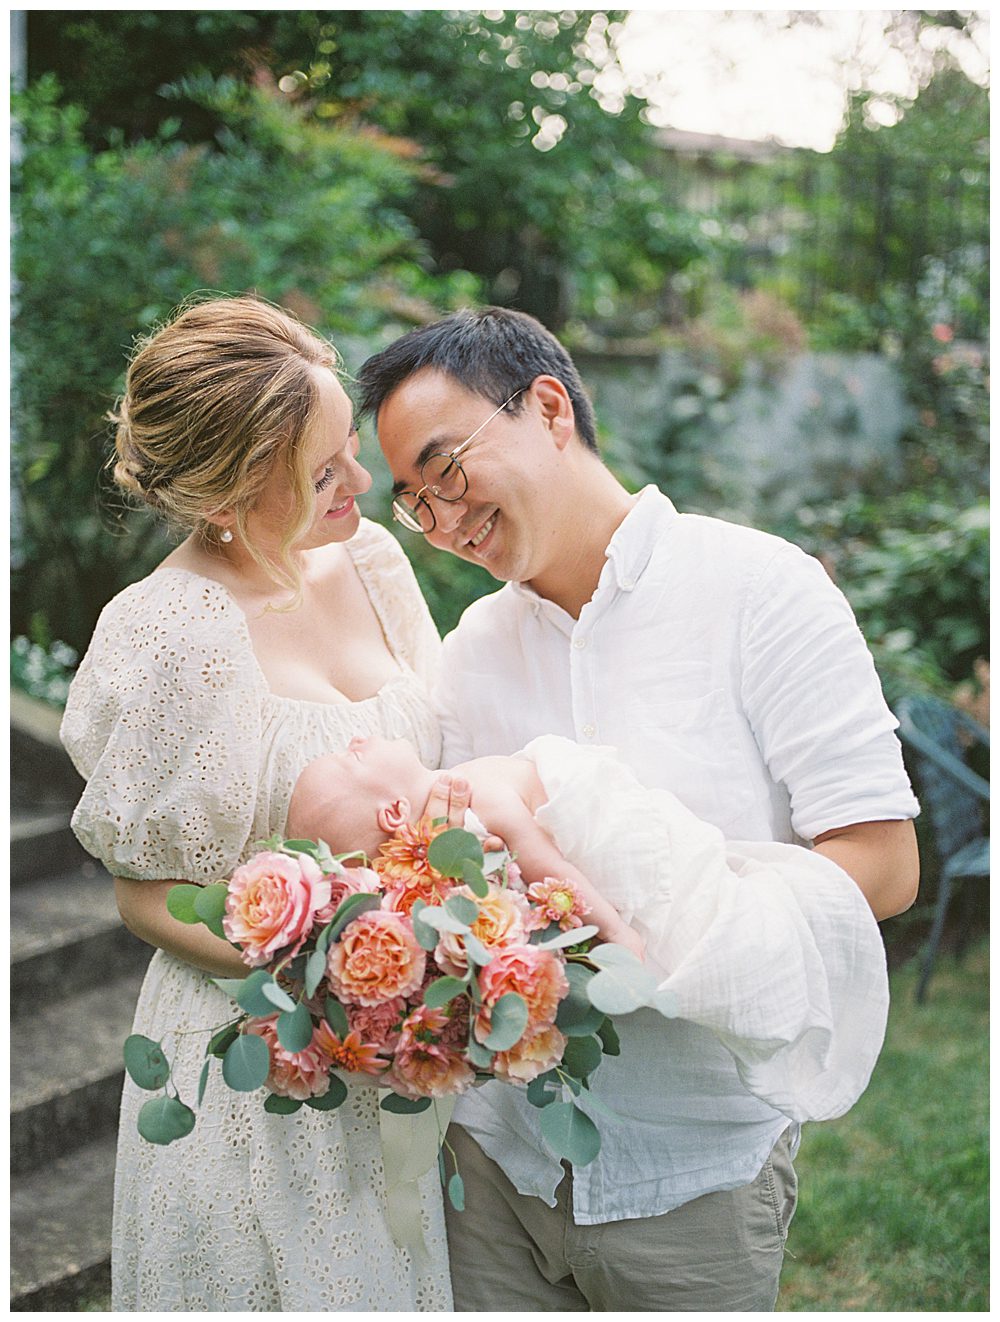 Mother smiles at her husband while they hold their newborn baby girl on bouquet of roses during Alexandria VA newborn session.